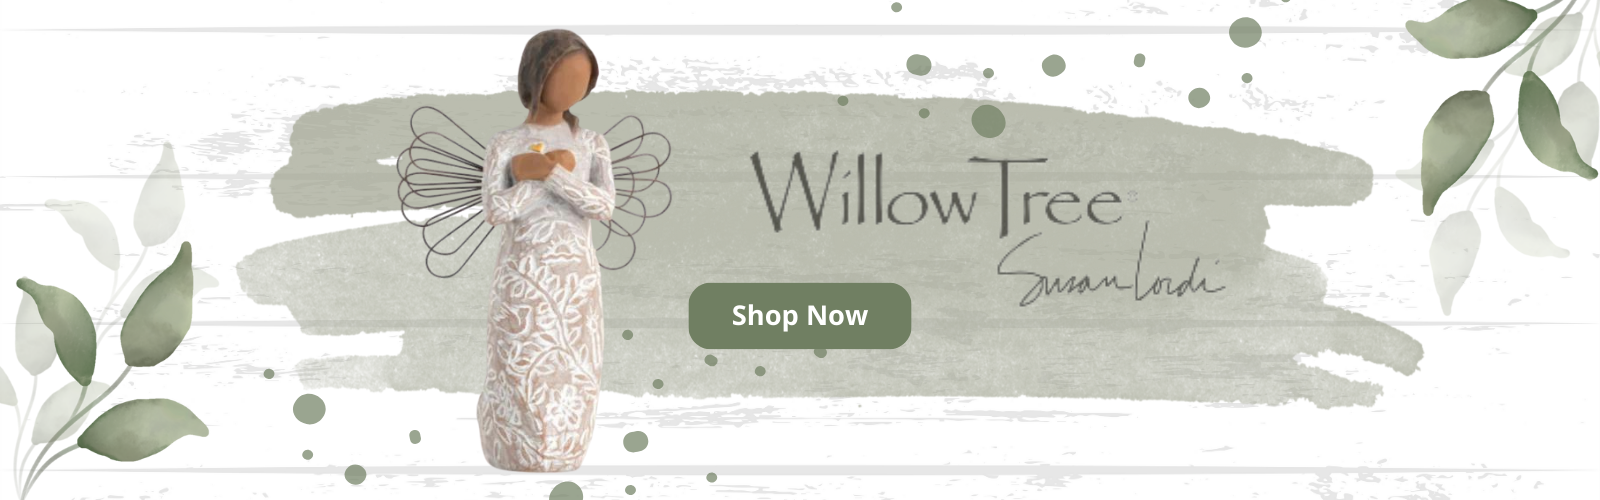 A Willow Tree angel figure next to the Willow Tree logo on a white distressed wood background with green watercolor willow leaves in the top right and bottom left corners.